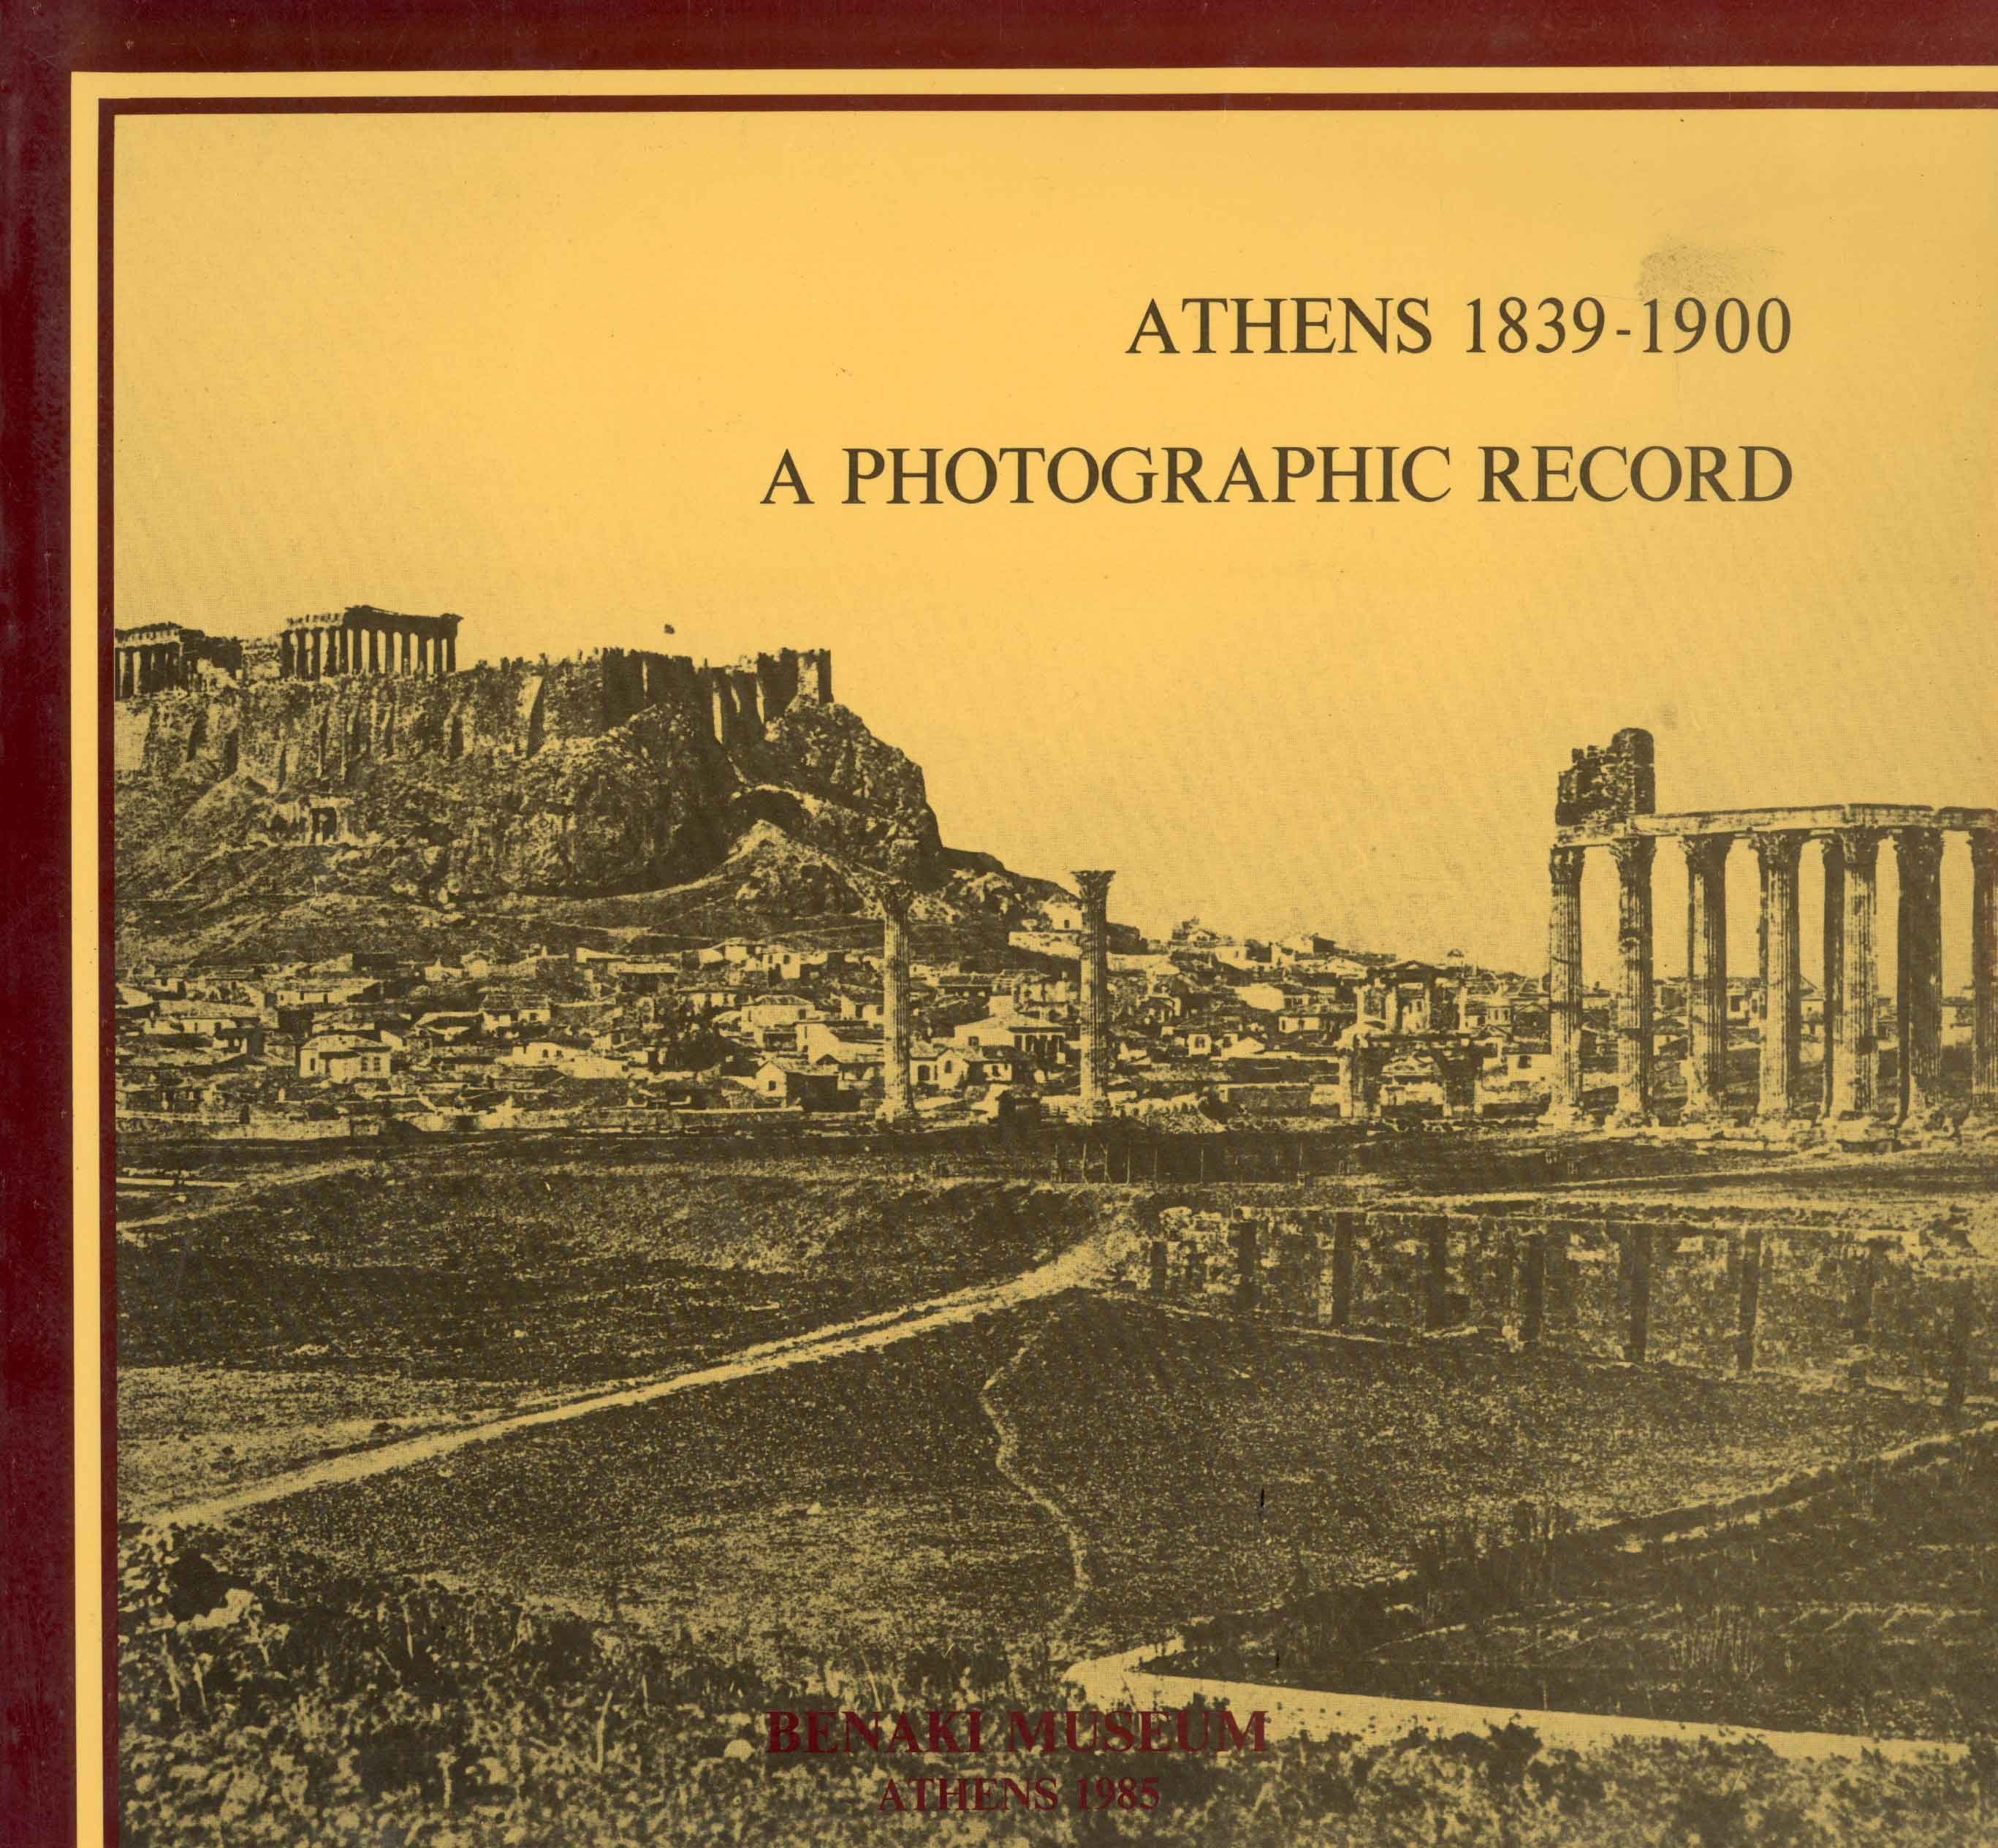 Athens 1839-1900. A photographic record